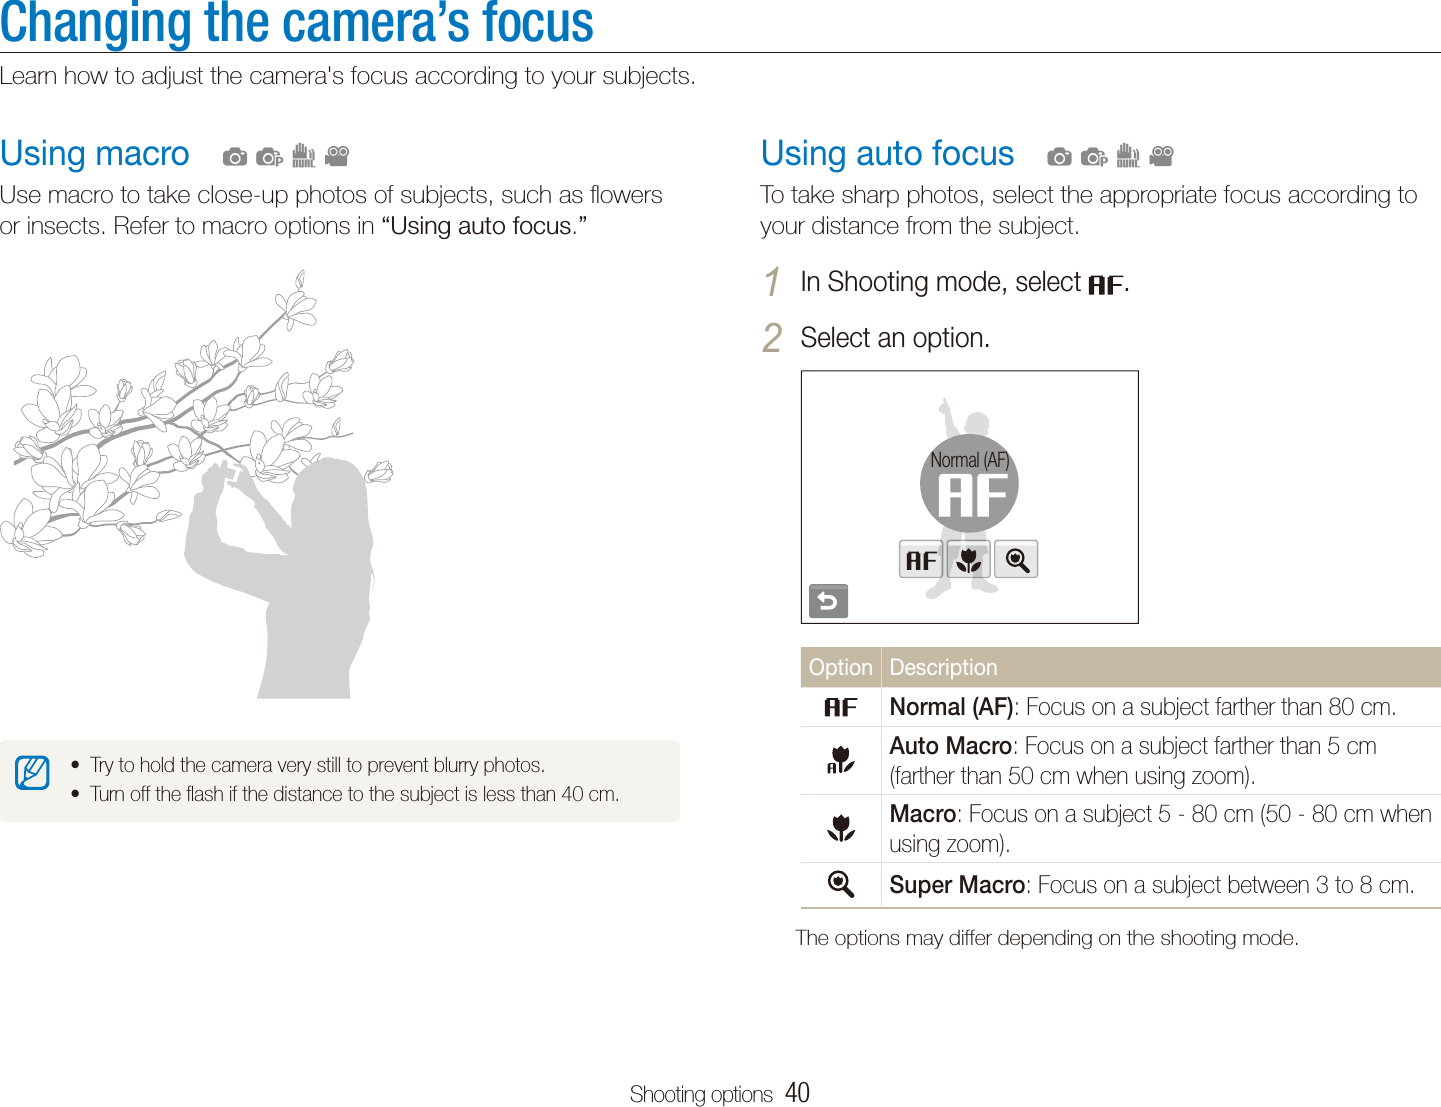 Shooting options  40Changing the camera’s focusLearn how to adjust the camera&apos;s focus according to your subjects.Using auto focusTo take sharp photos, select the appropriate focus according to your distance from the subject.In Shooting mode, select 1 .Select an option.2 Normal (AF)Option DescriptionNormal (AF): Focus on a subject farther than 80 cm. Auto Macro: Focus on a subject farther than 5 cm (farther than 50 cm when using zoom).Macro: Focus on a subject 5 - 80 cm (50 - 80 cm when using zoom).Super Macro: Focus on a subject between 3 to 8 cm.The options may differ depending on the shooting mode.  apdvUsing macroUse macro to take close-up photos of subjects, such as ﬂowers or insects. Refer to macro options in “Using auto focus.”Try to hold the camera very still to prevent blurry photos.tTurn off the ﬂash if the distance to the subject is less than 40 cm.t  apdv